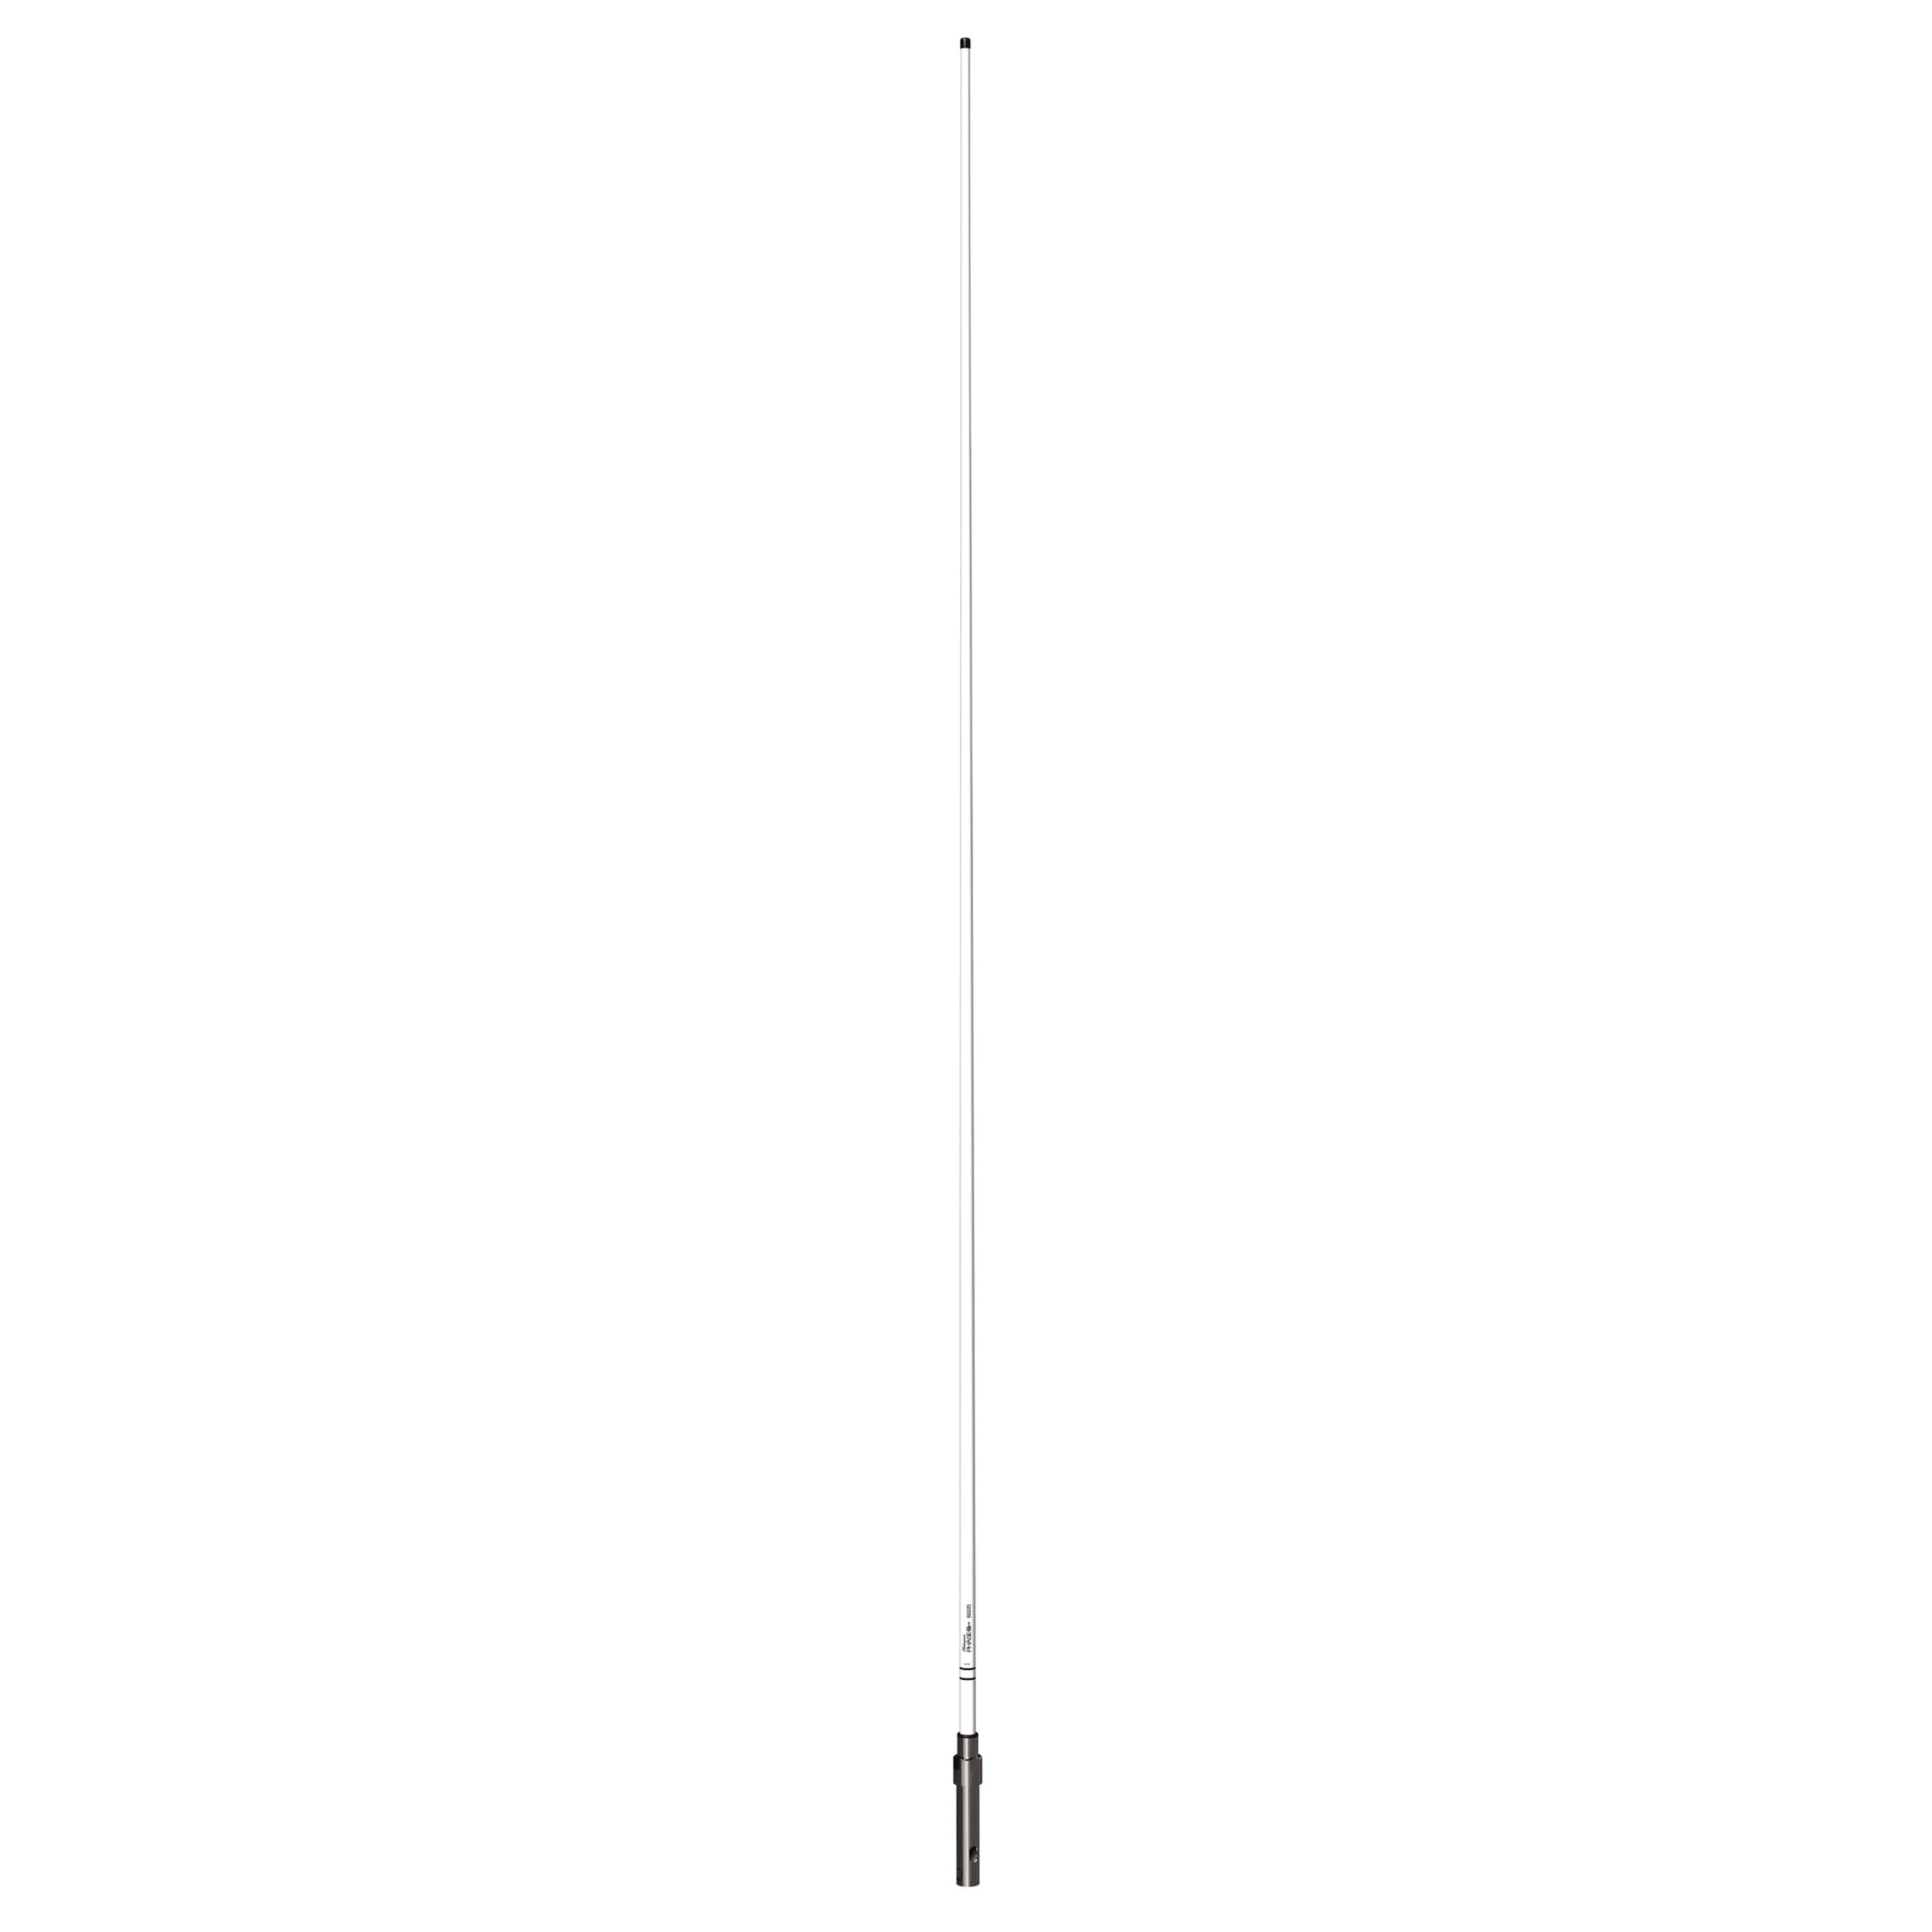 New Shakespeare Vhf 8 6225-r Phase Iii Antenna - No Cable